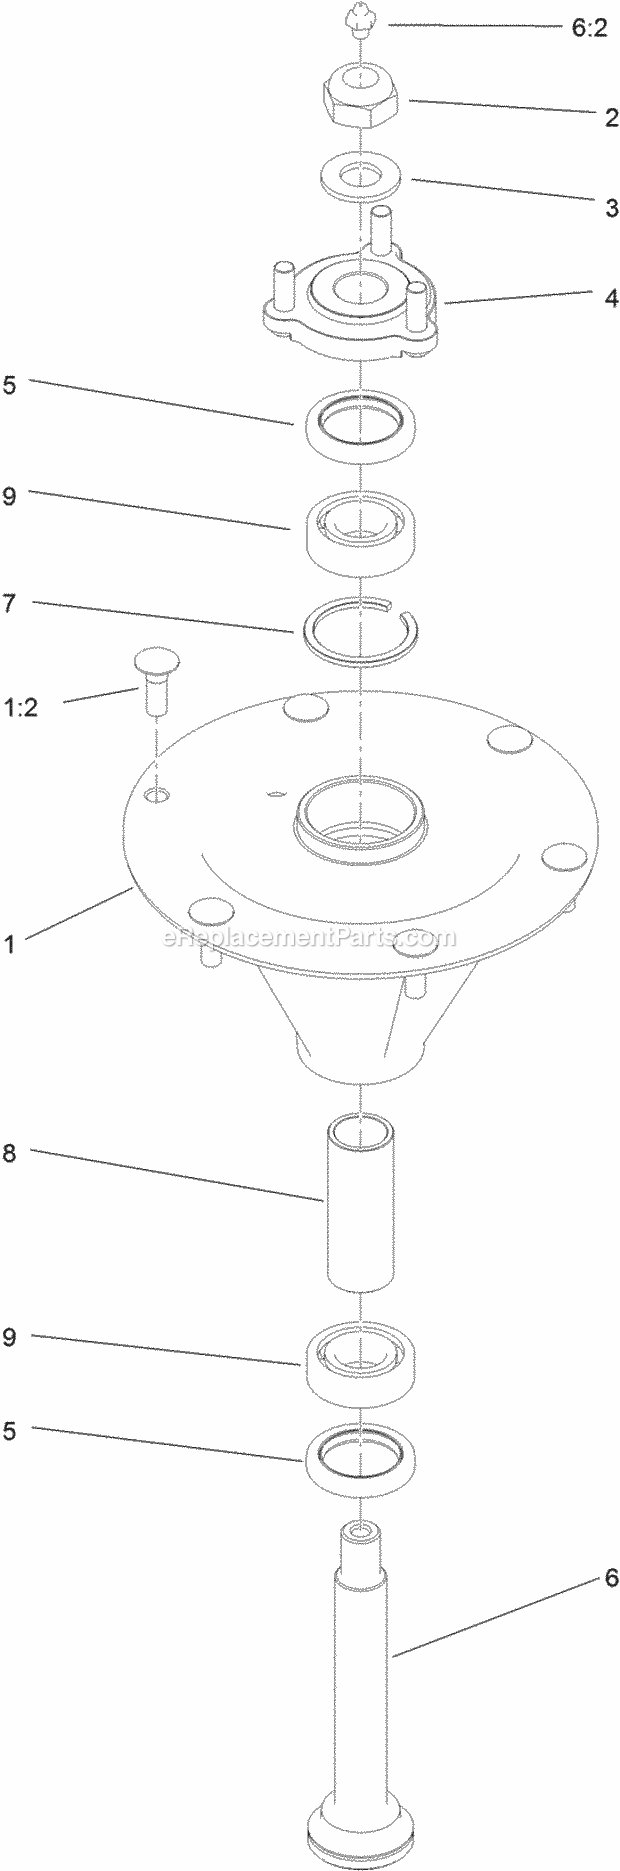 Toro 74991 (315000001-315999999) Z Master Professional 5000 Series Riding Mower, With 60in Turbo Force Side Discharge Mower, 201 Spindle Assembly No. 119-8560 Diagram